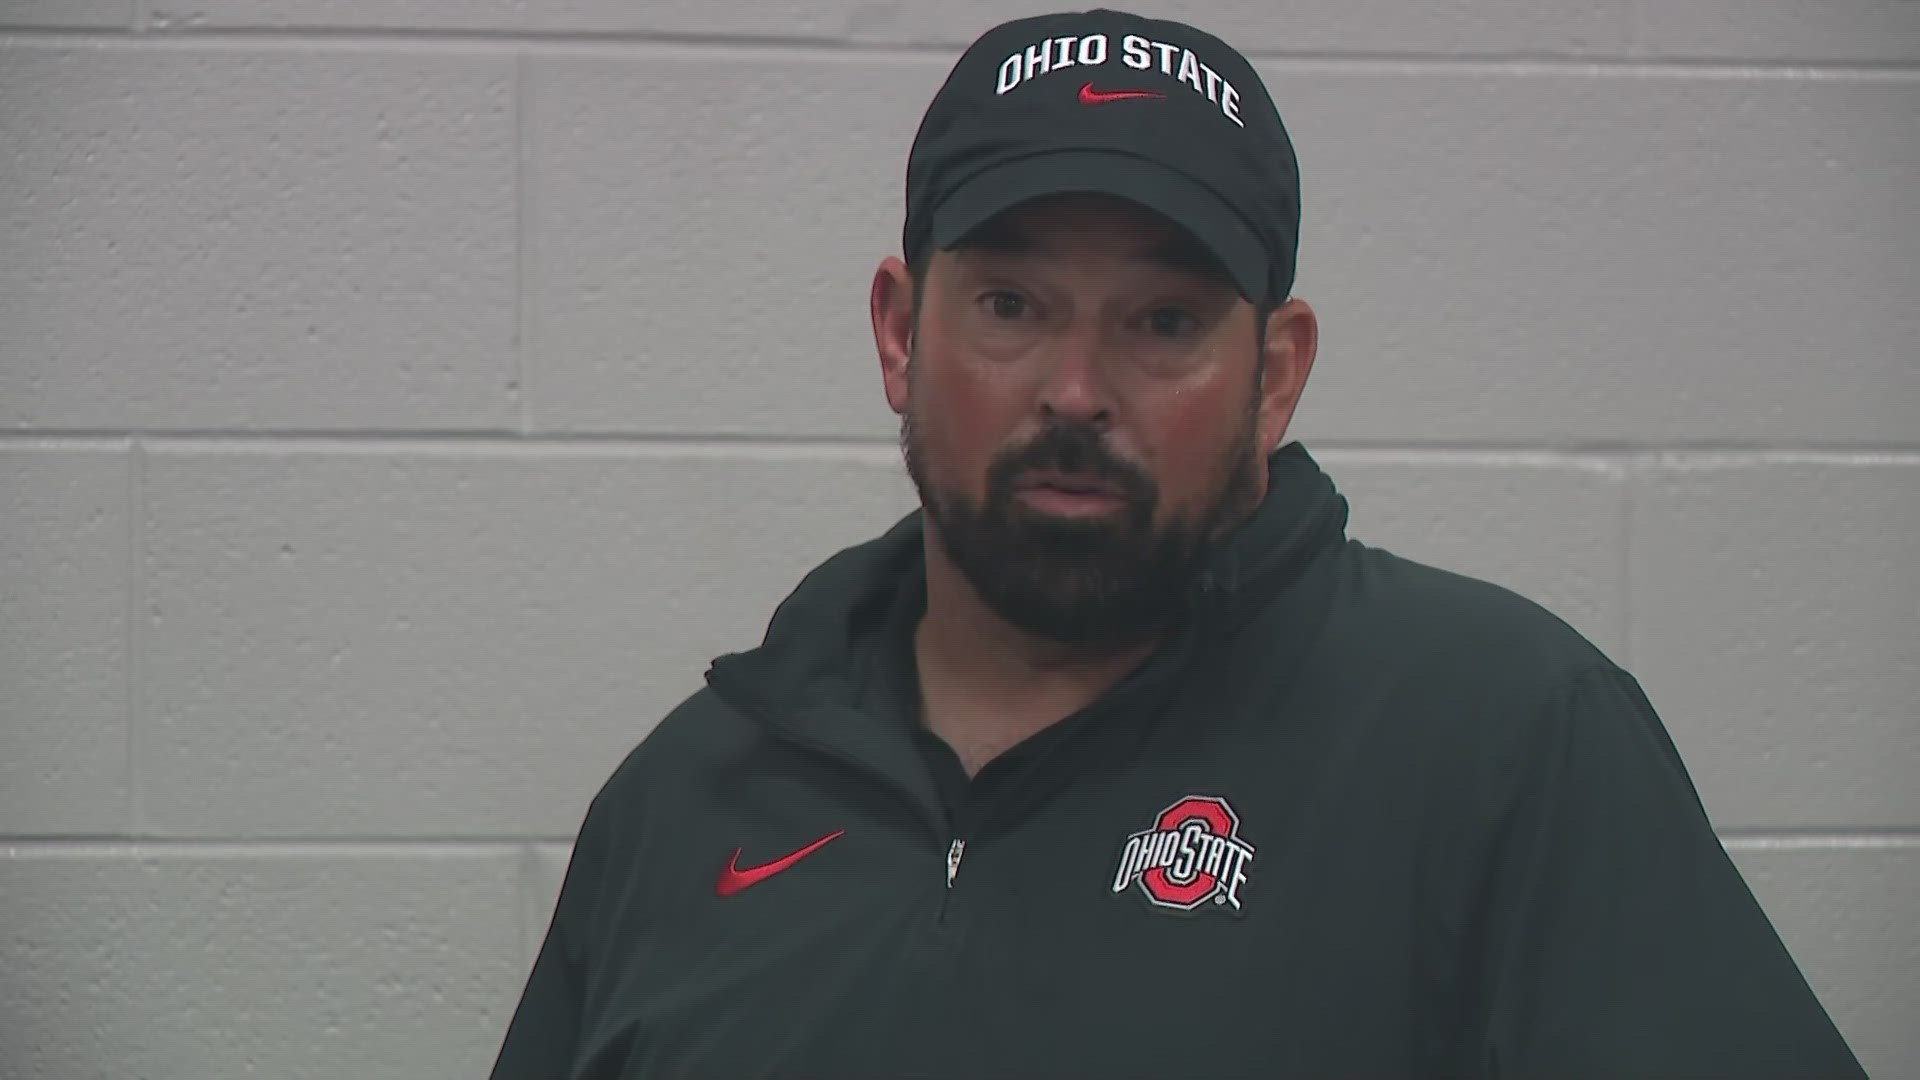 Ryan Day discussed the Buckeyes' 17-14 win and recent comments from Lou Holtz about his team.